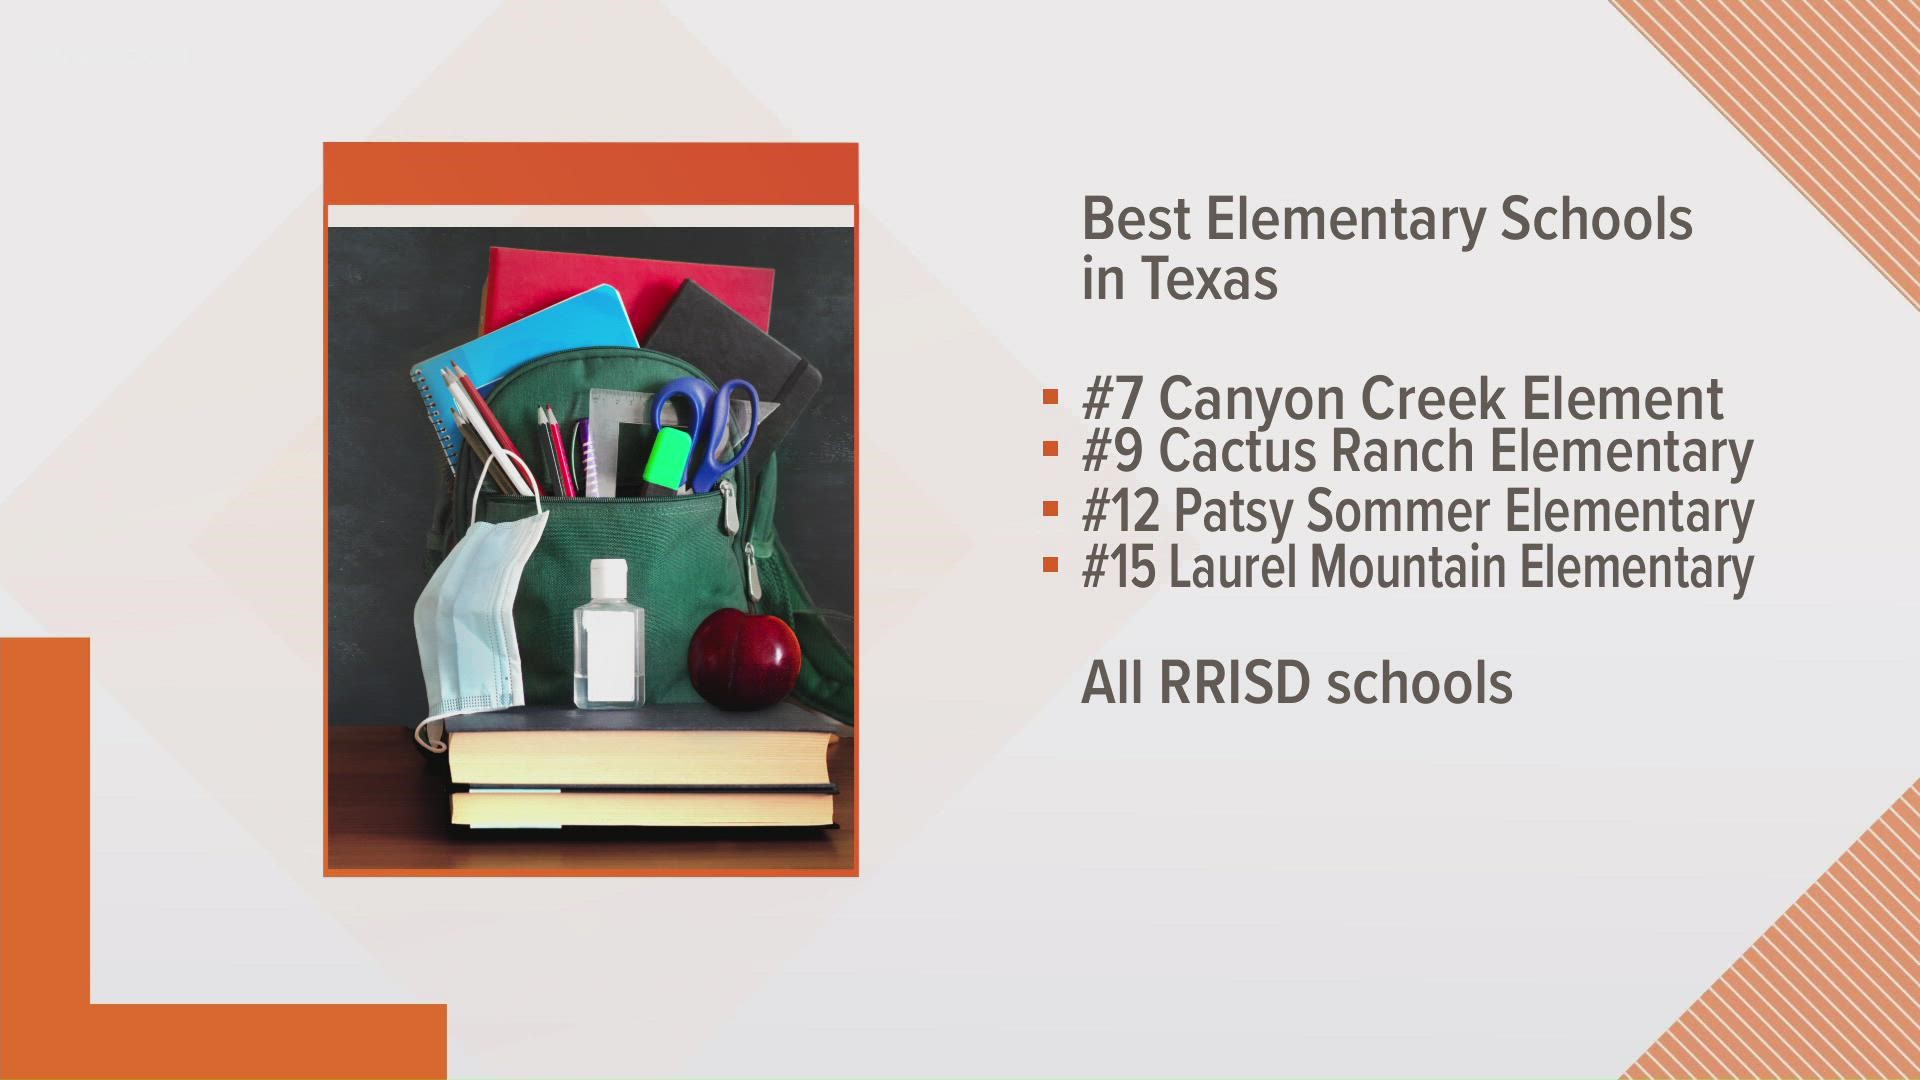 Several local elementary schools were named among the best in Texas.